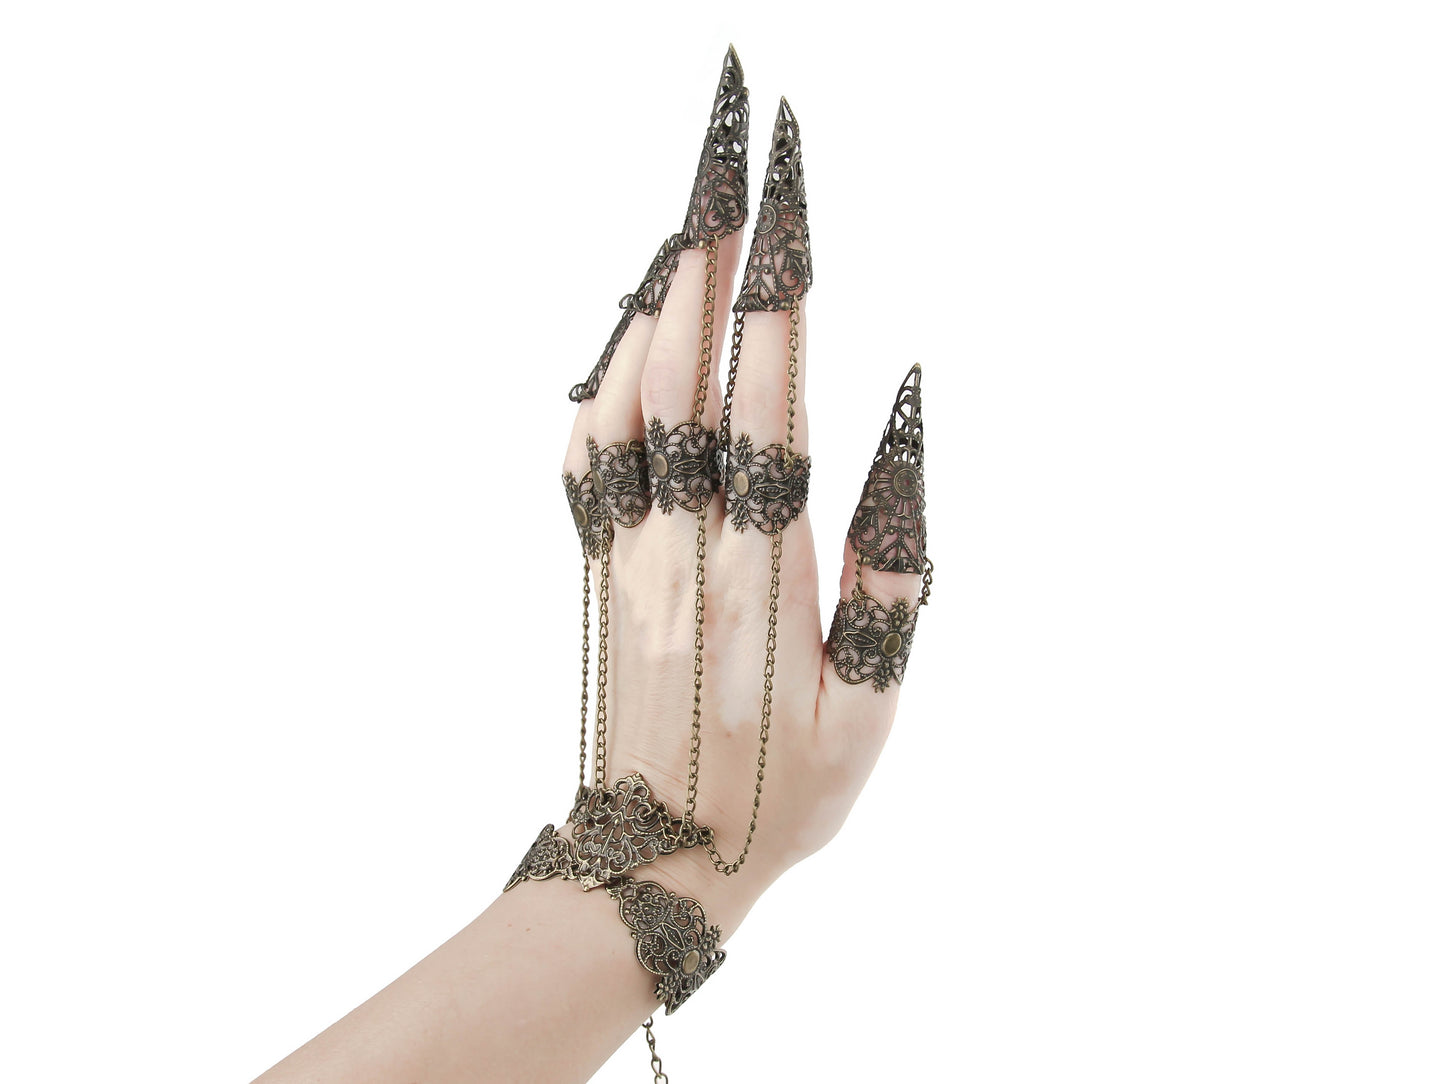 Elegant hand displaying ornate bronze nail rings connected by delicate chains, epitomizing a luxurious gothic beauty and witchy aesthetic, ideal for enhancing a goth-inspired look.